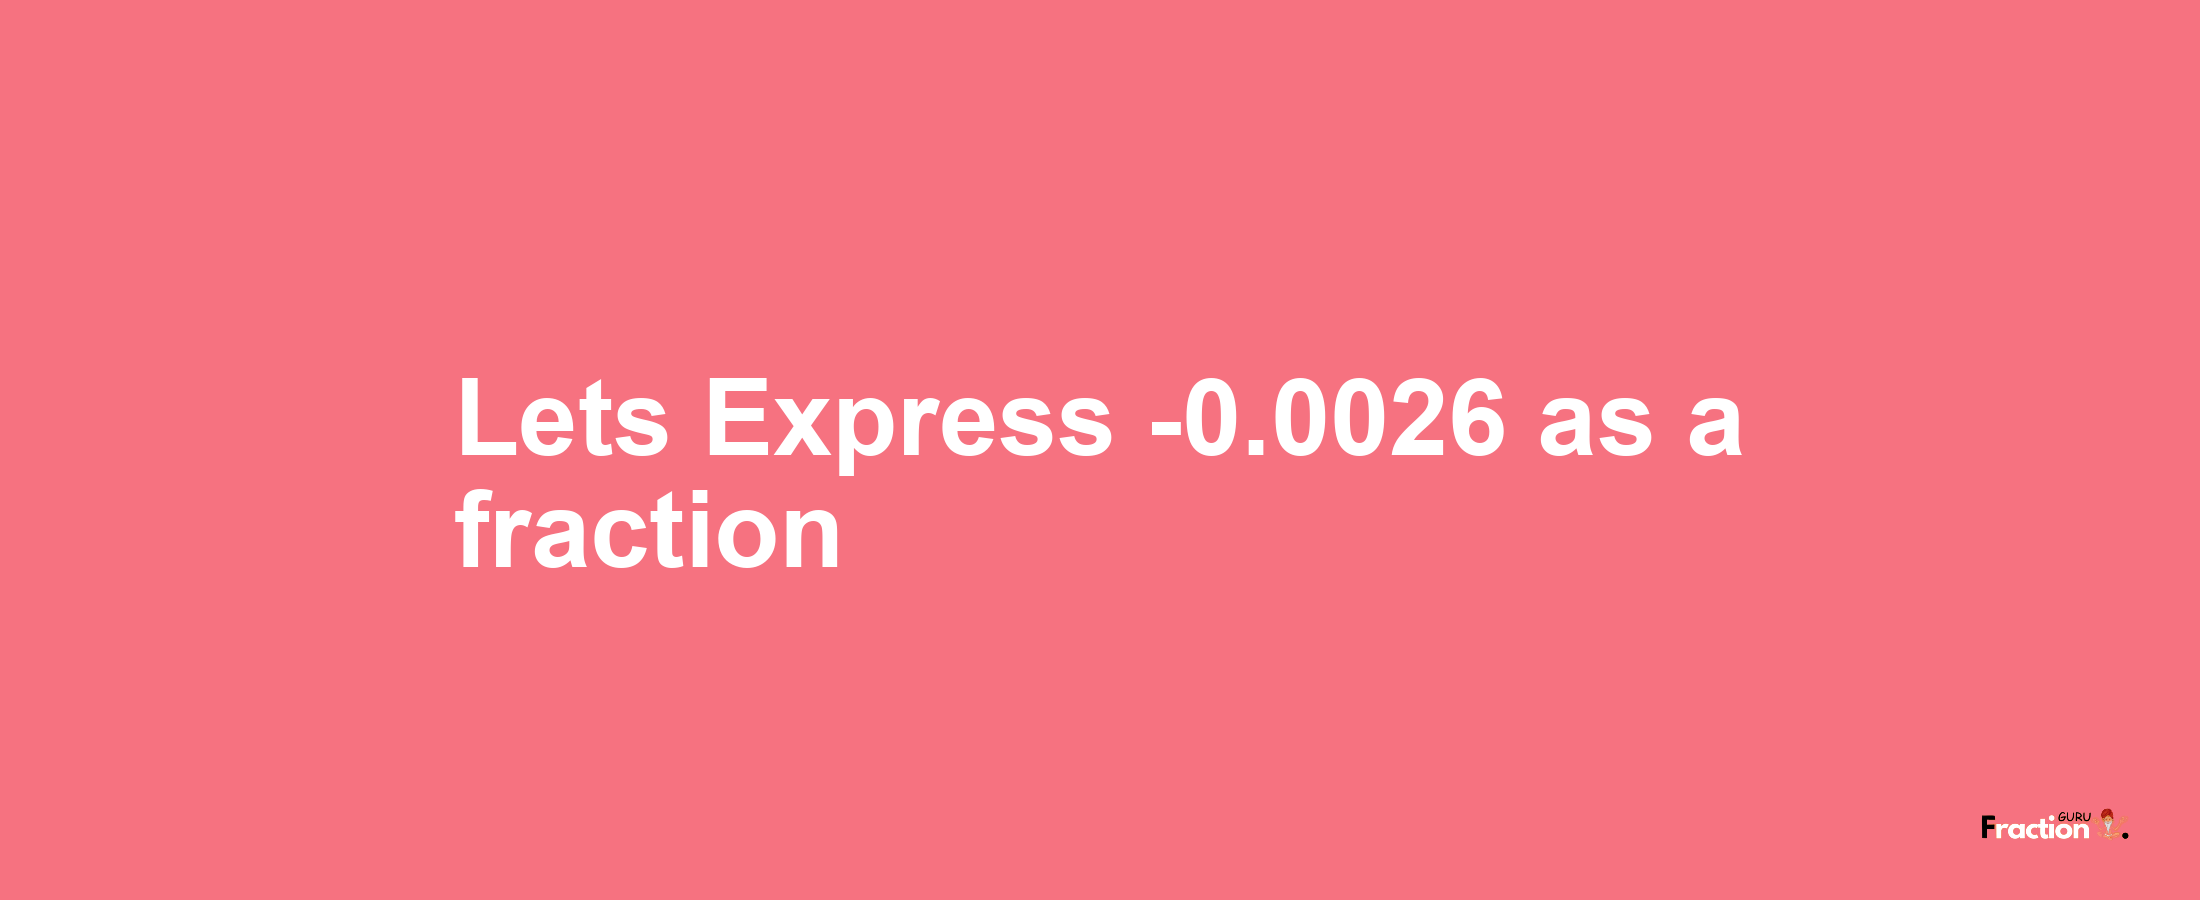 Lets Express -0.0026 as afraction